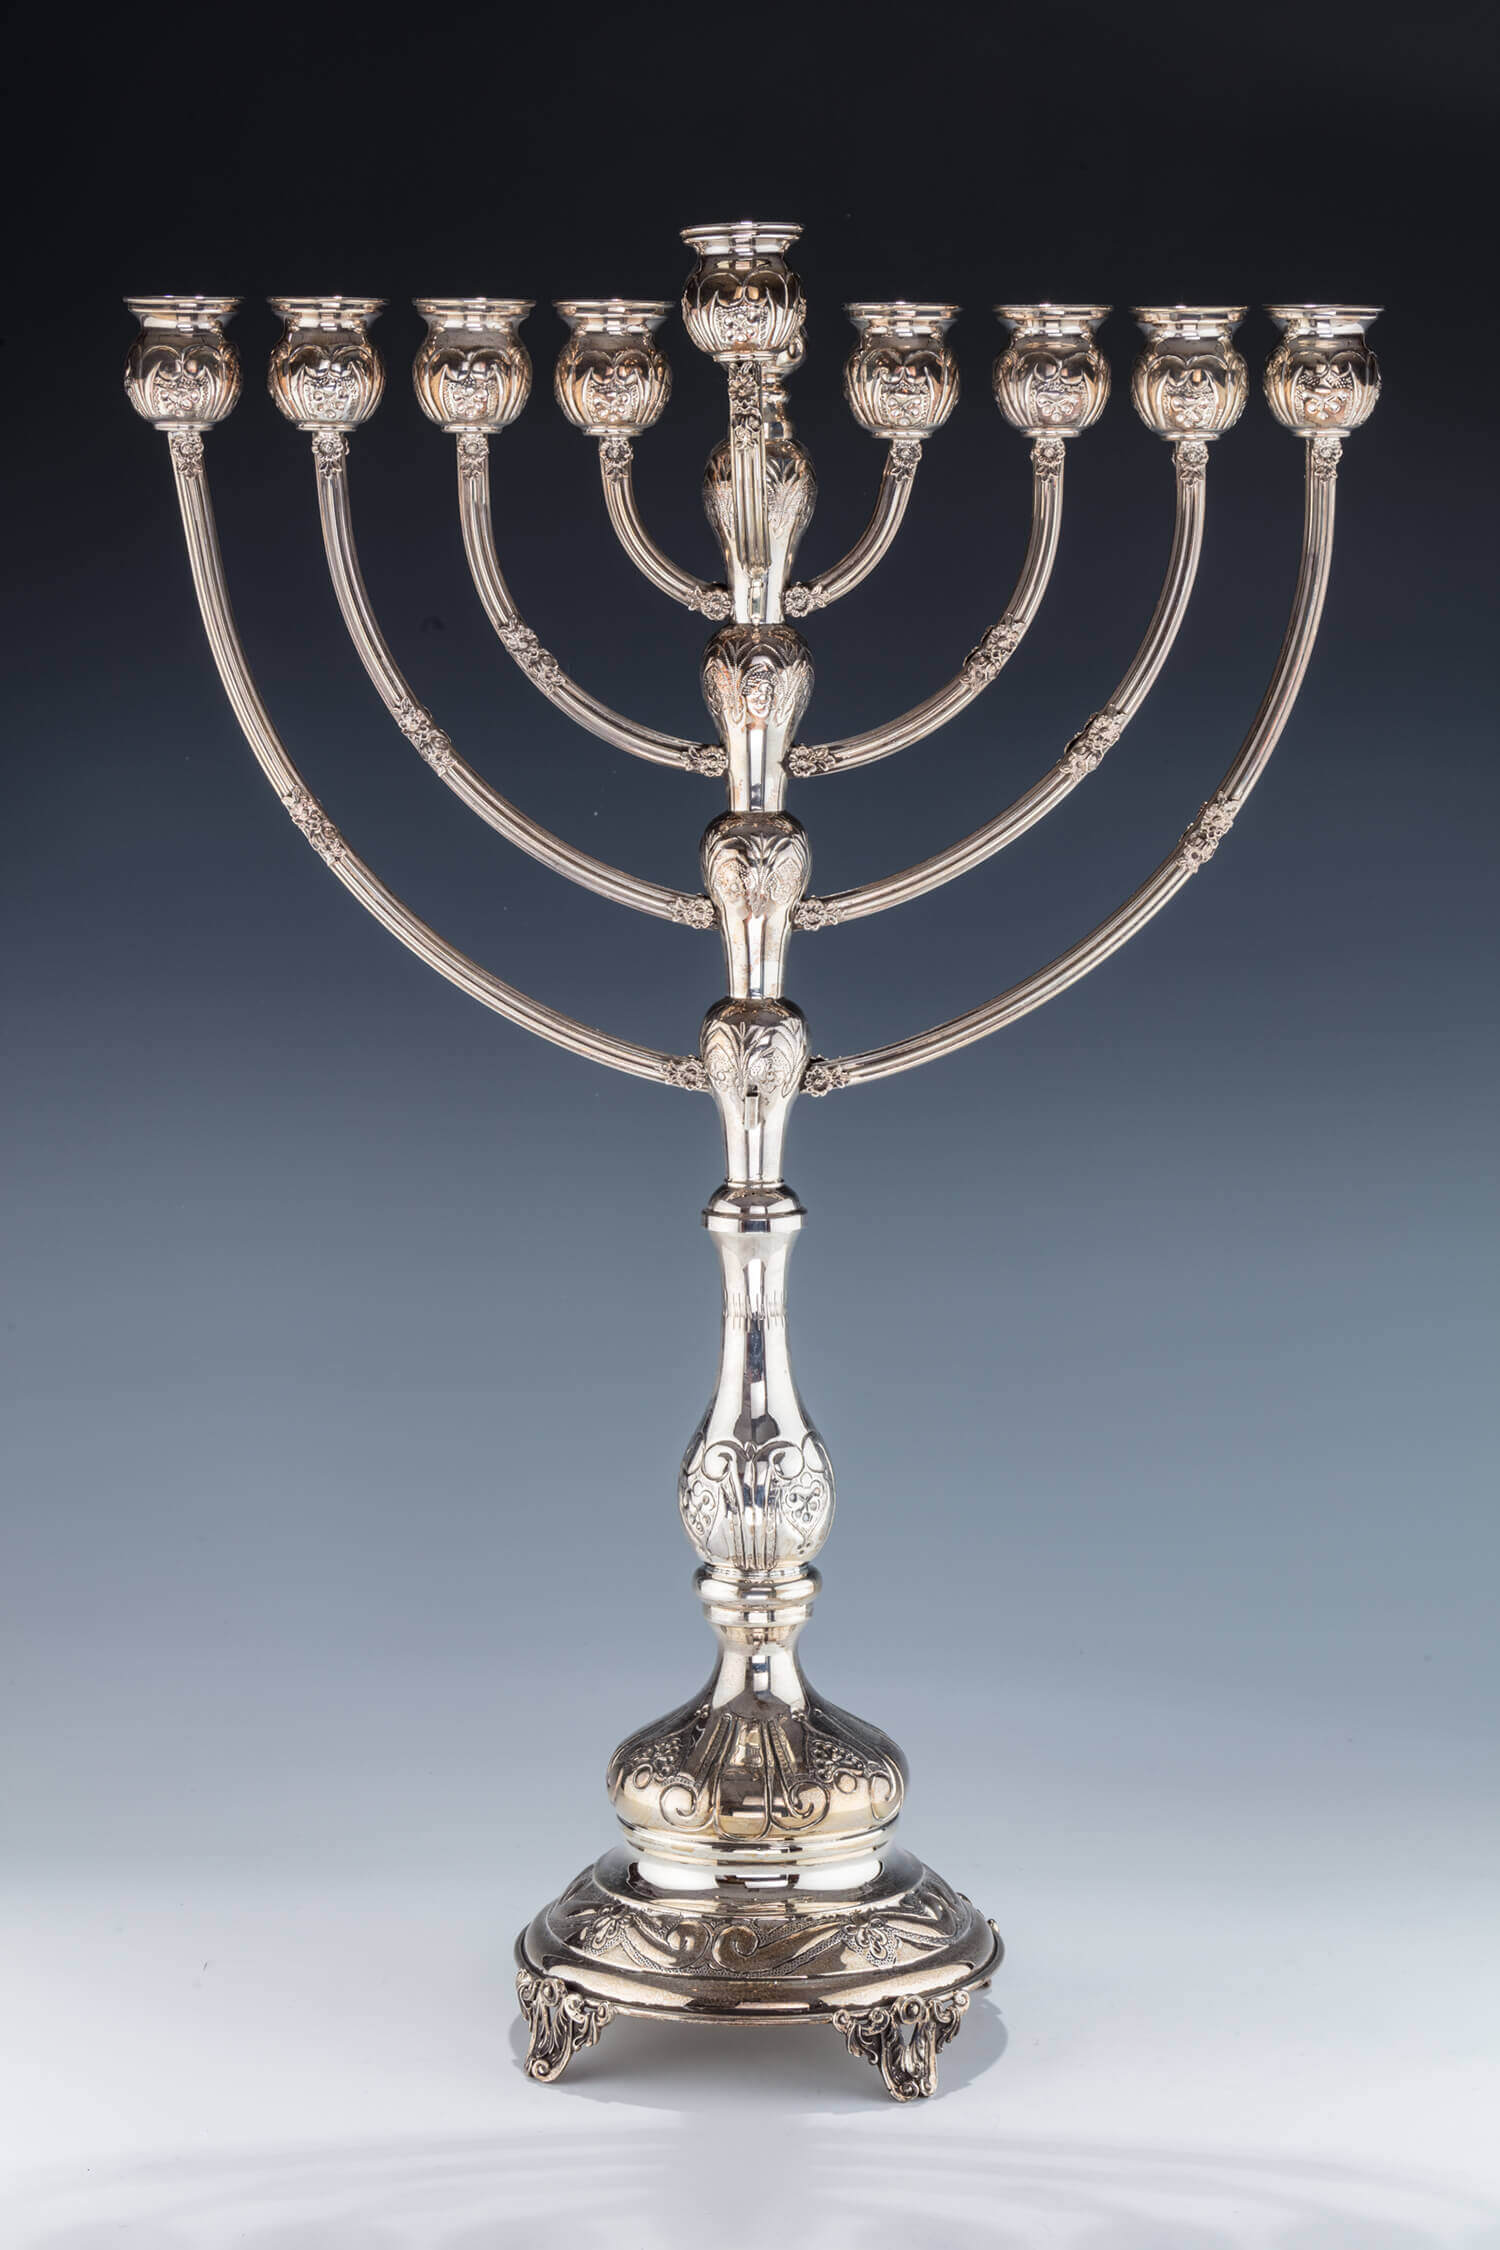 139. A LARGE STERLING SILVER MENORAH